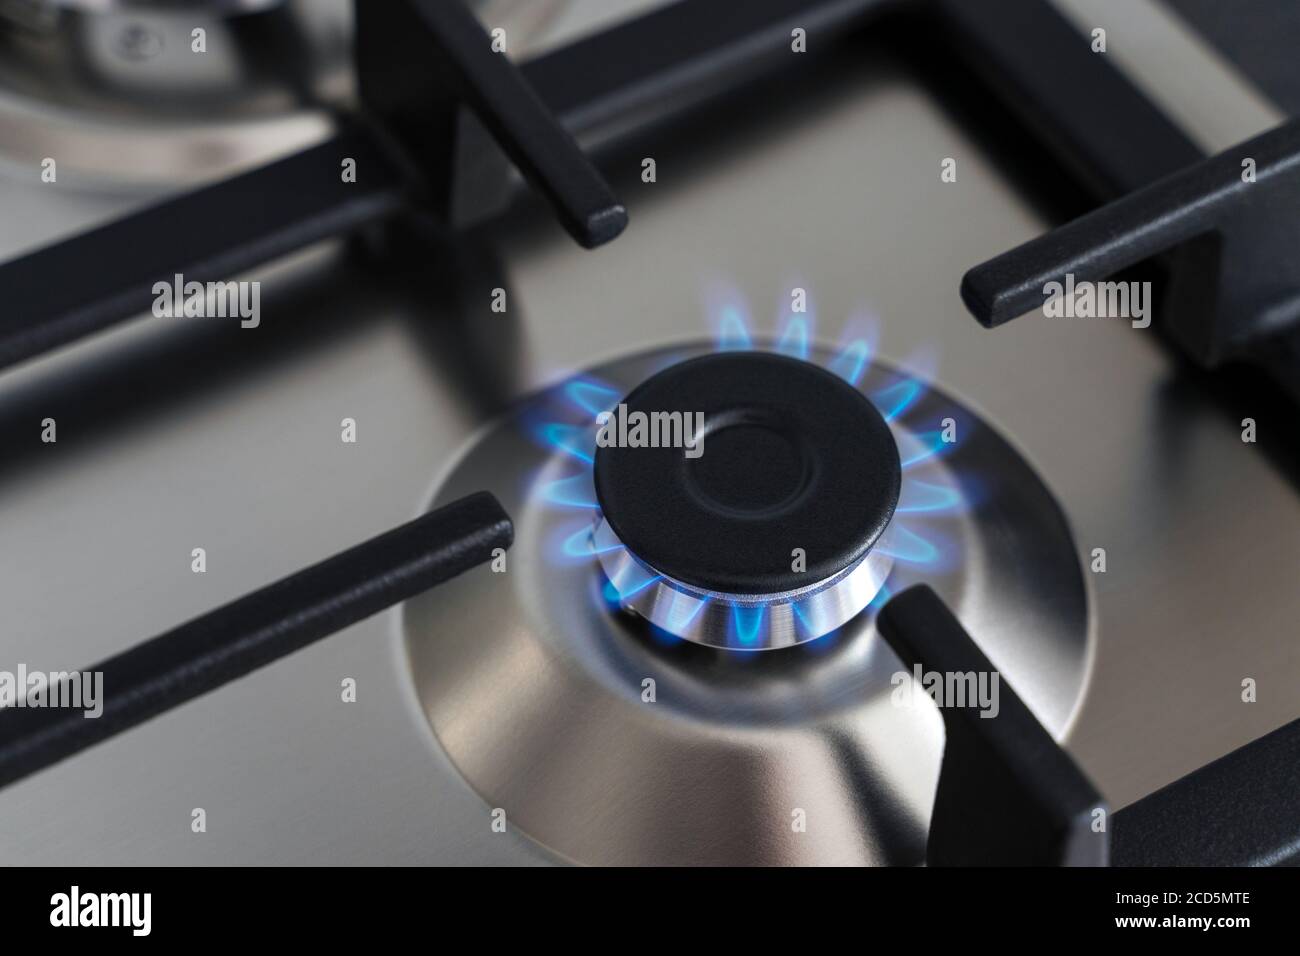 Closeup blue flame from a gas stove burner. Stainless steel kitchen surface  with cast-iron grill Stock Photo - Alamy